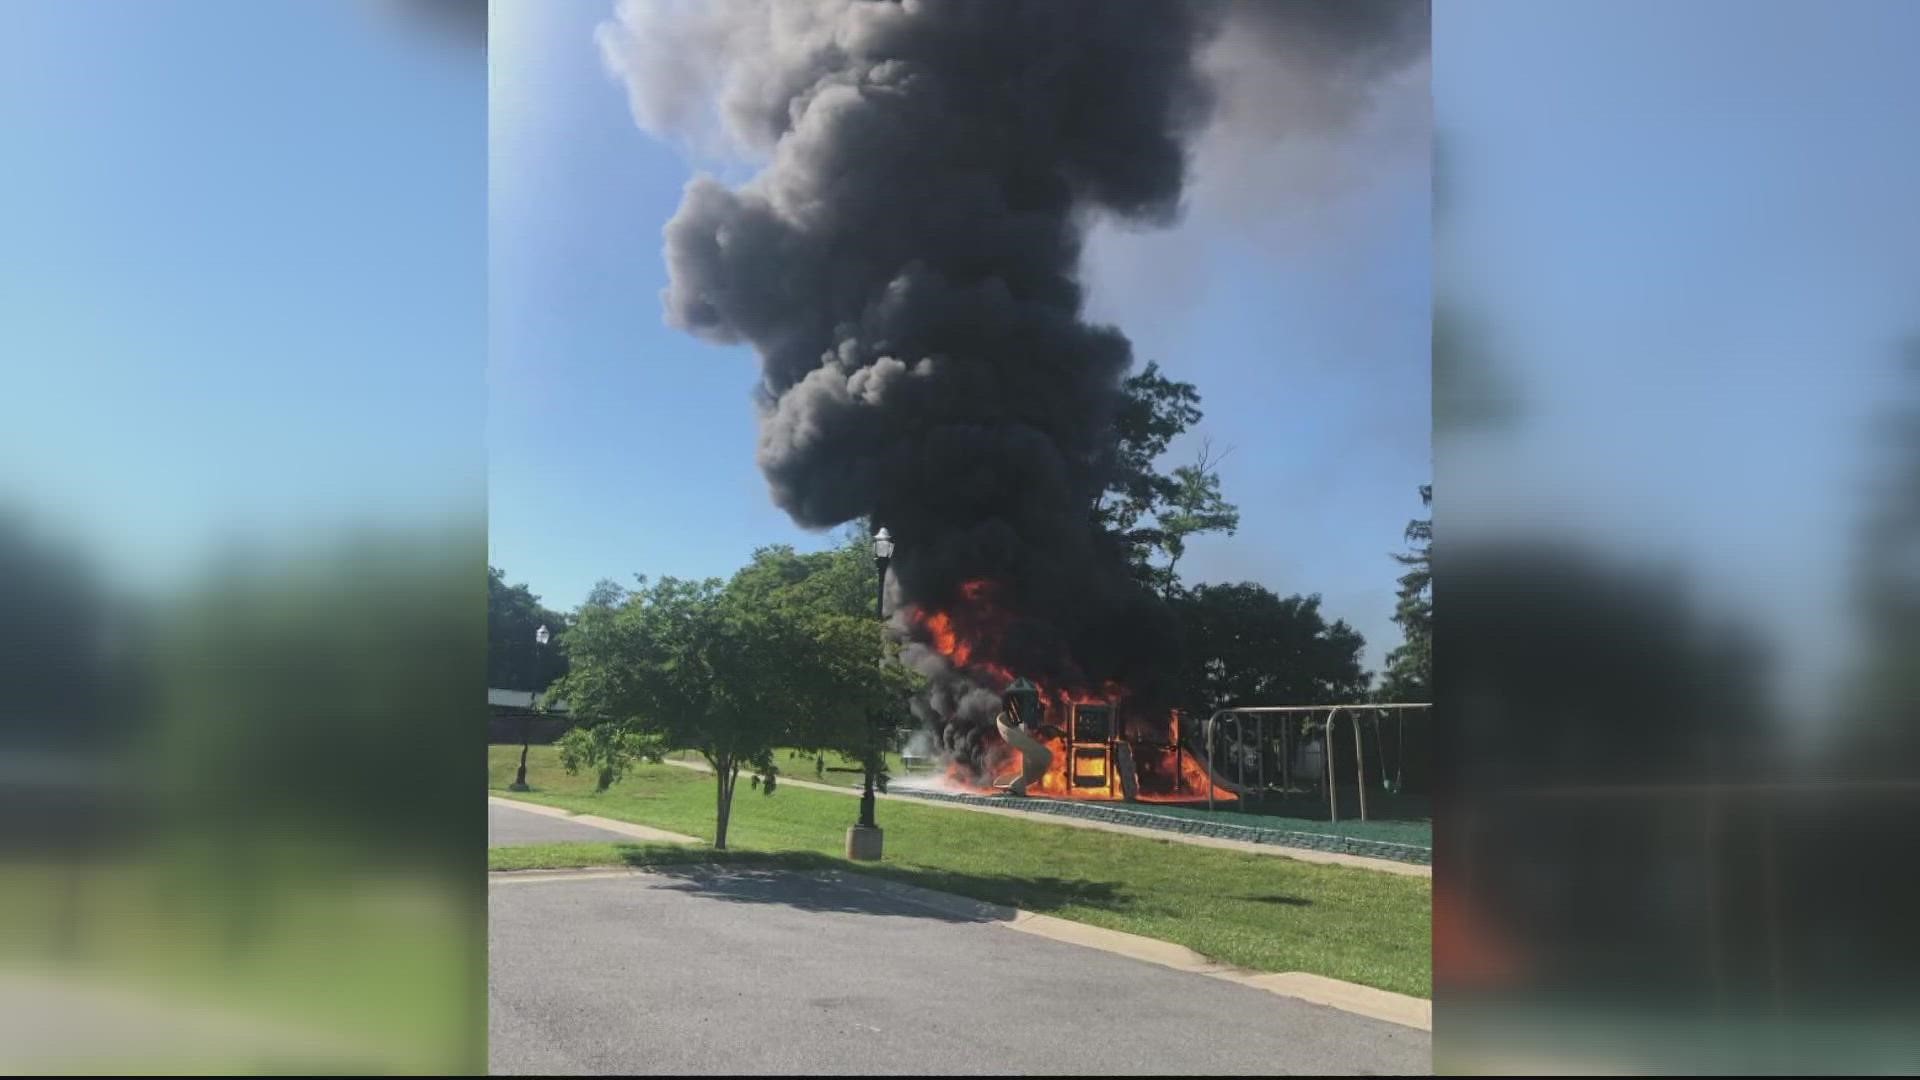 The fire caused $75,000 worth of damages to the playground.